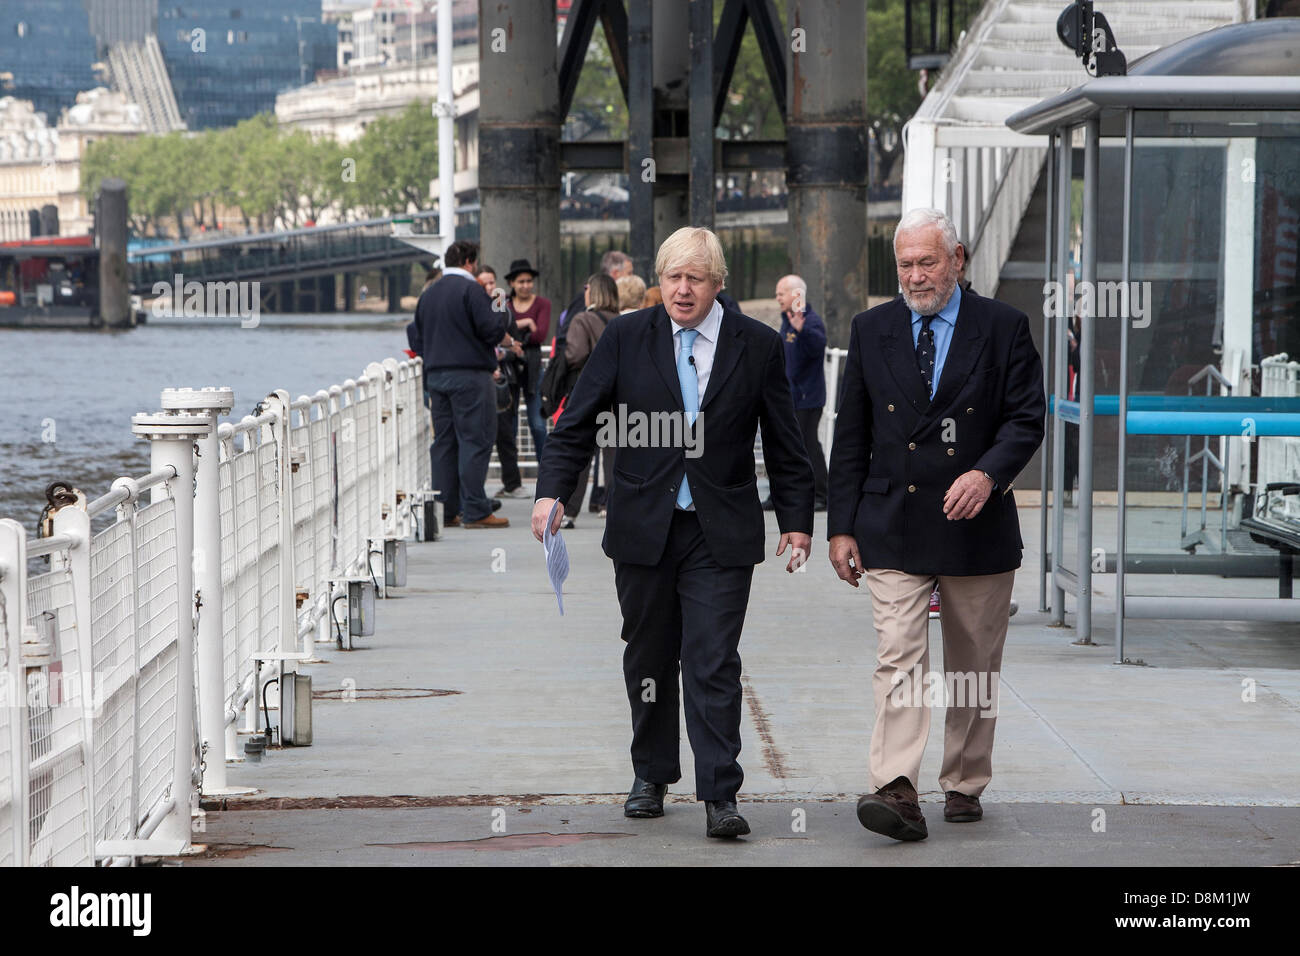 London, UK. 31st May 2013. London Mayor, Boris Johnson and sailing legend Sir Robin Knox-Johnston, arriving to announce the 9th edition of the 'Clipper Round the World Yacht Race' which will start and finish  in London, The race begins in Sept 2013 and end in late July 2014.  Credit:  Mario Mitsis / Alamy Live News Stock Photo